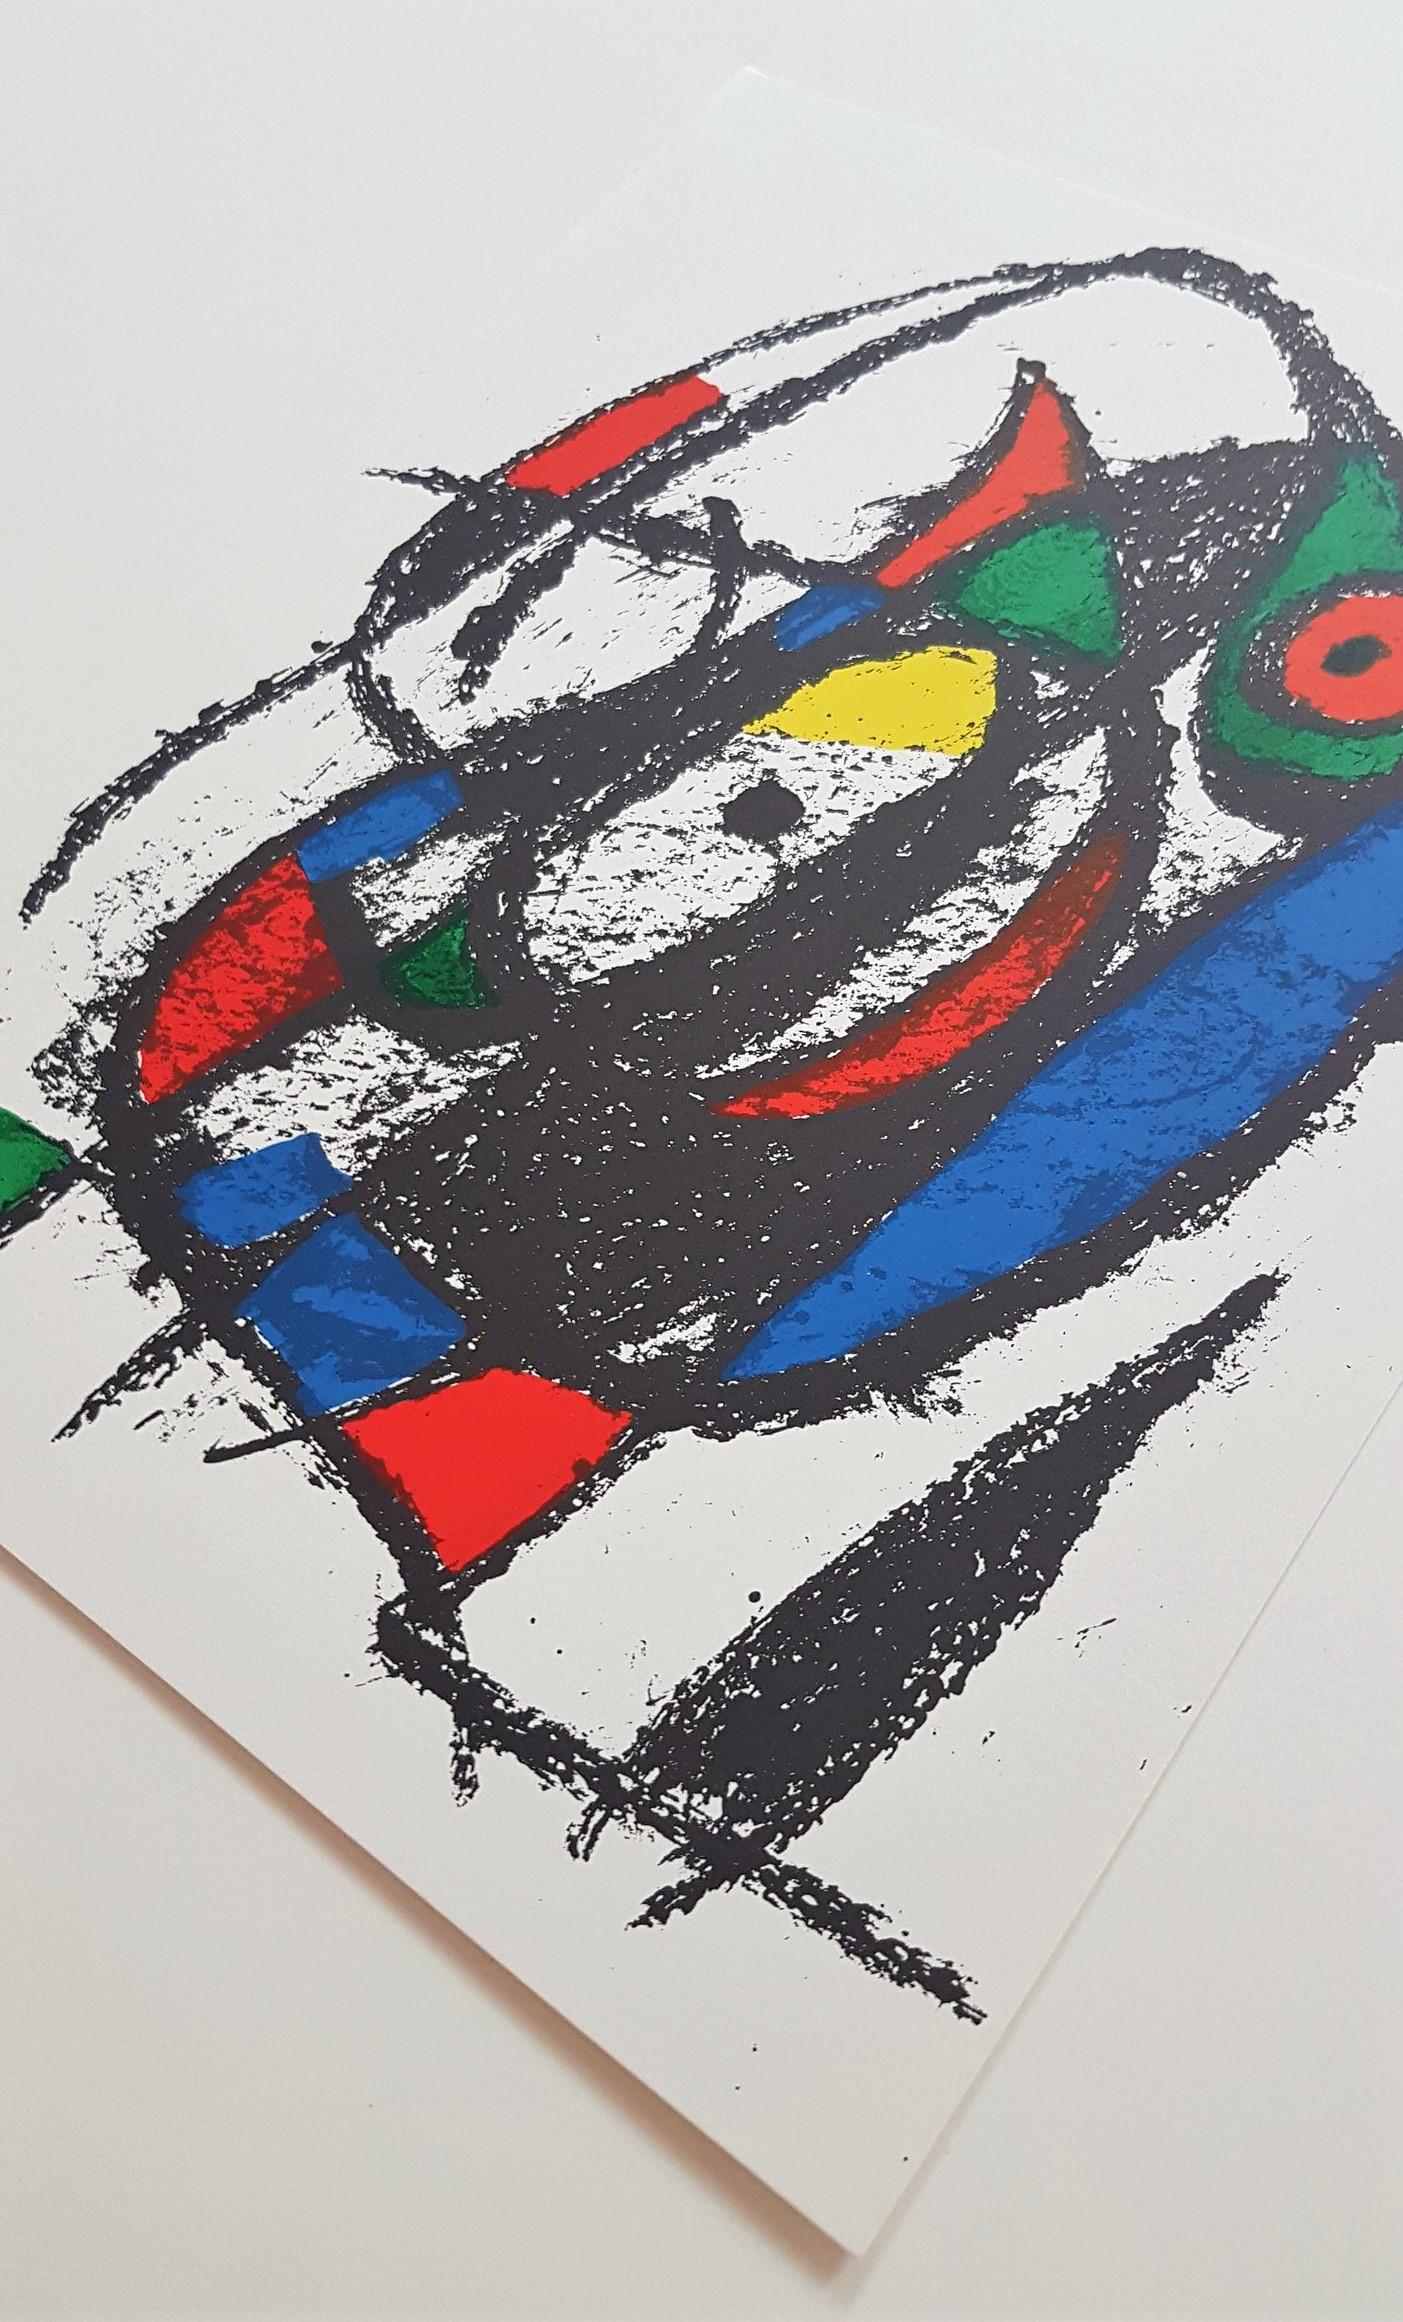 Lithographie Originale IV - Abstract Expressionist Print by Joan Miró